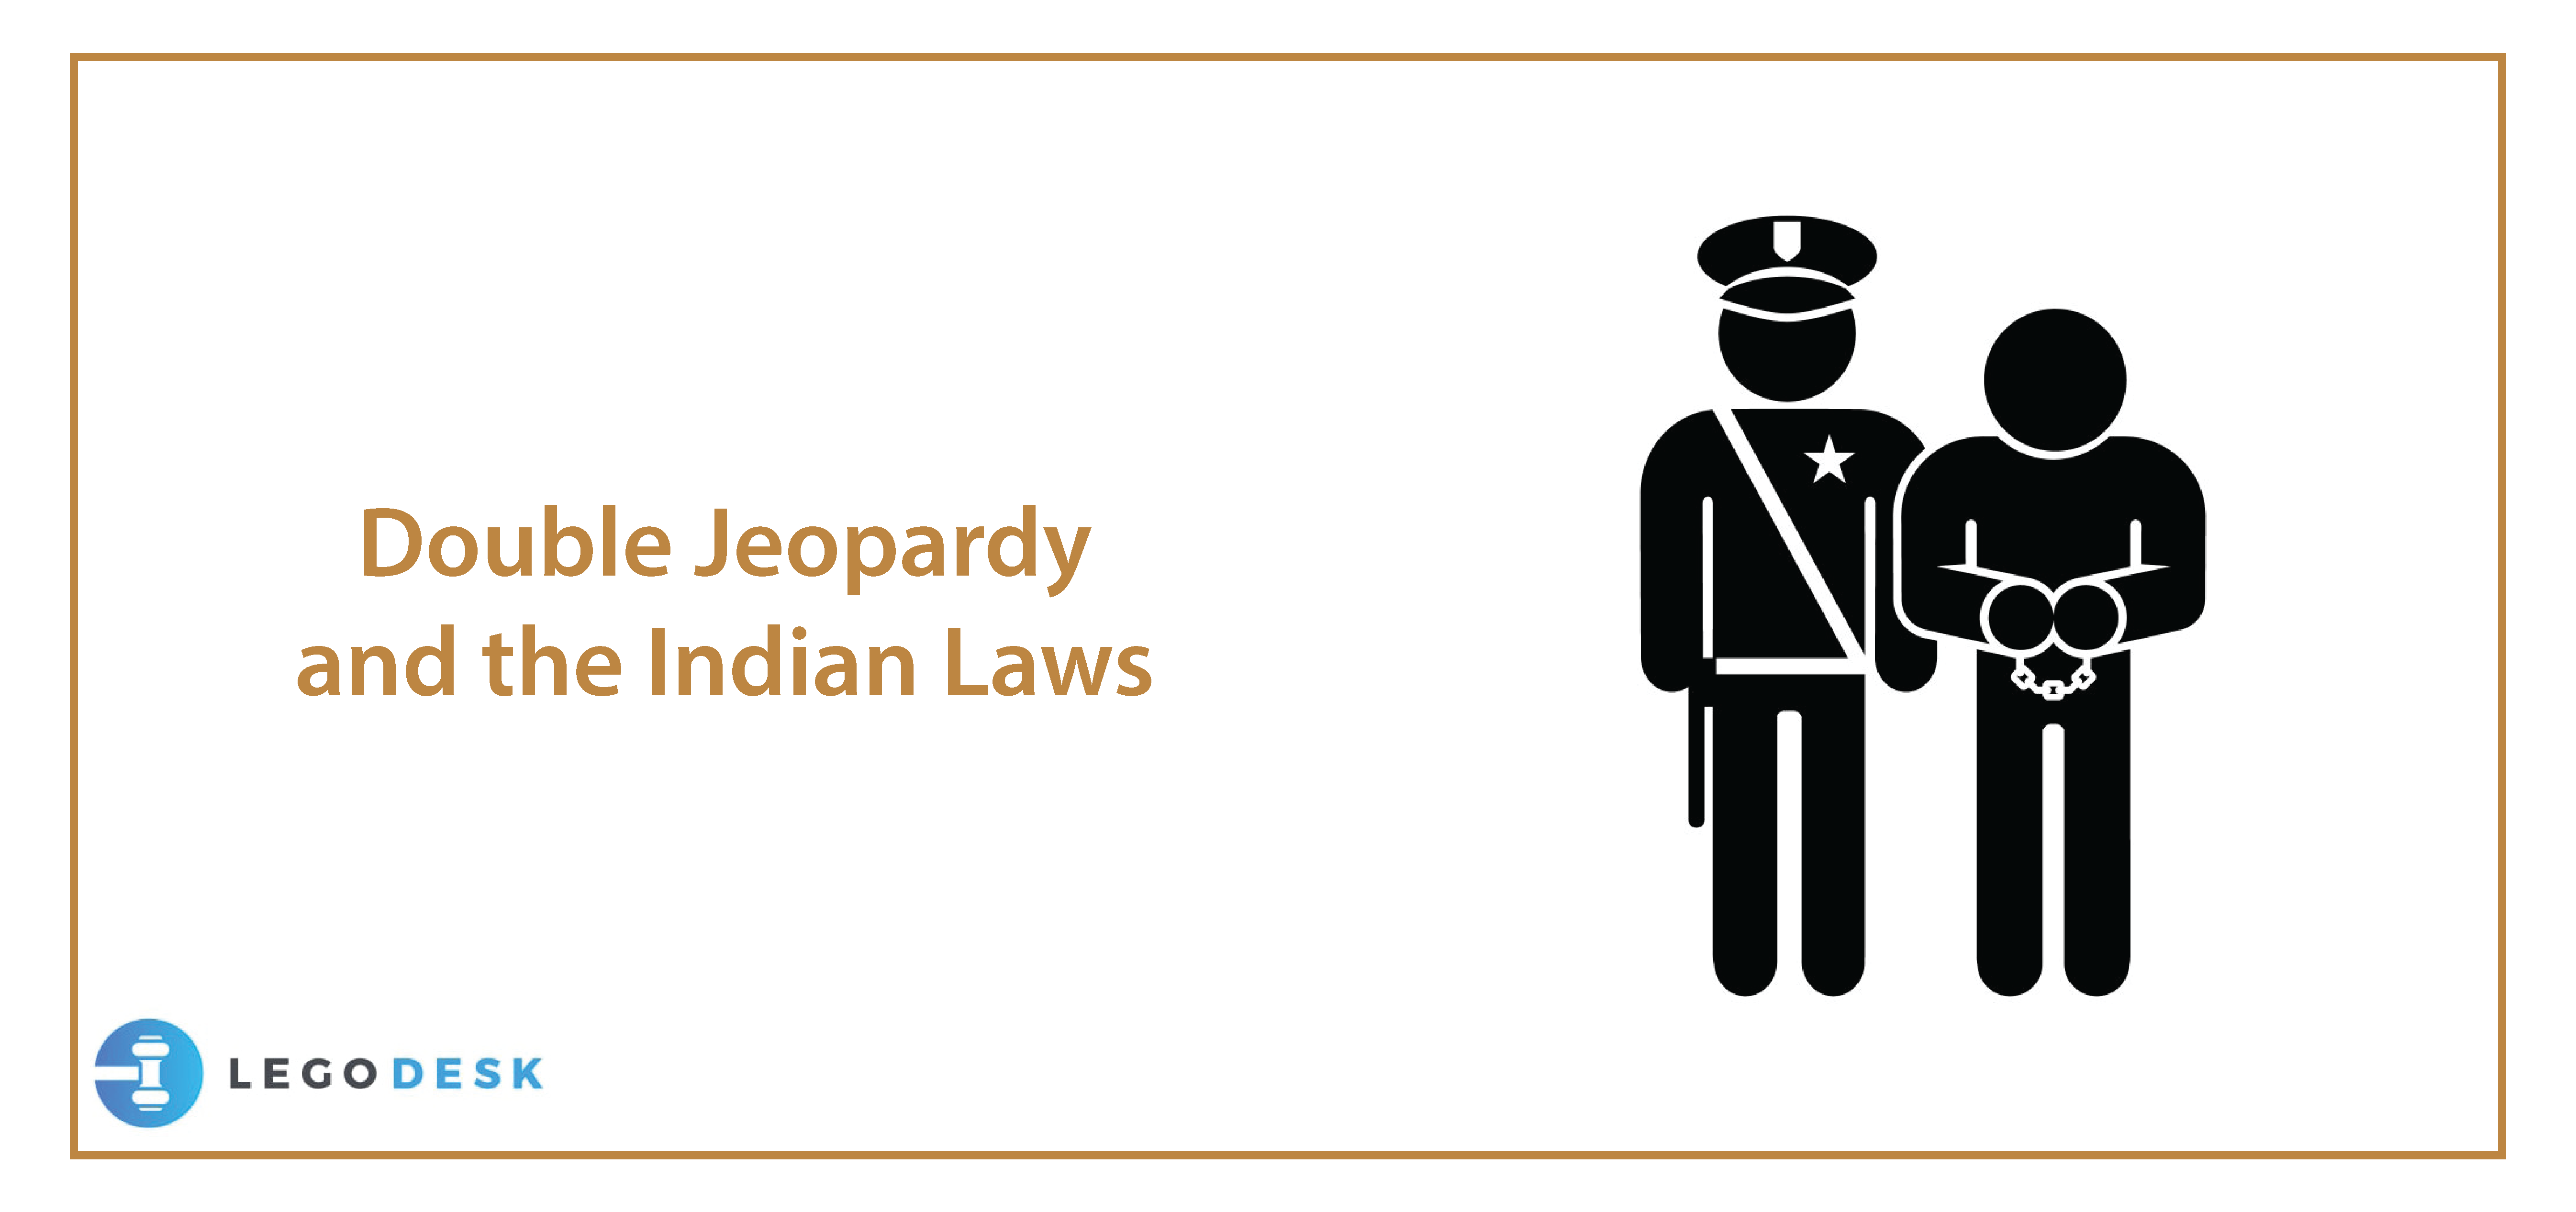 Double Jeopardy and the Indian Laws